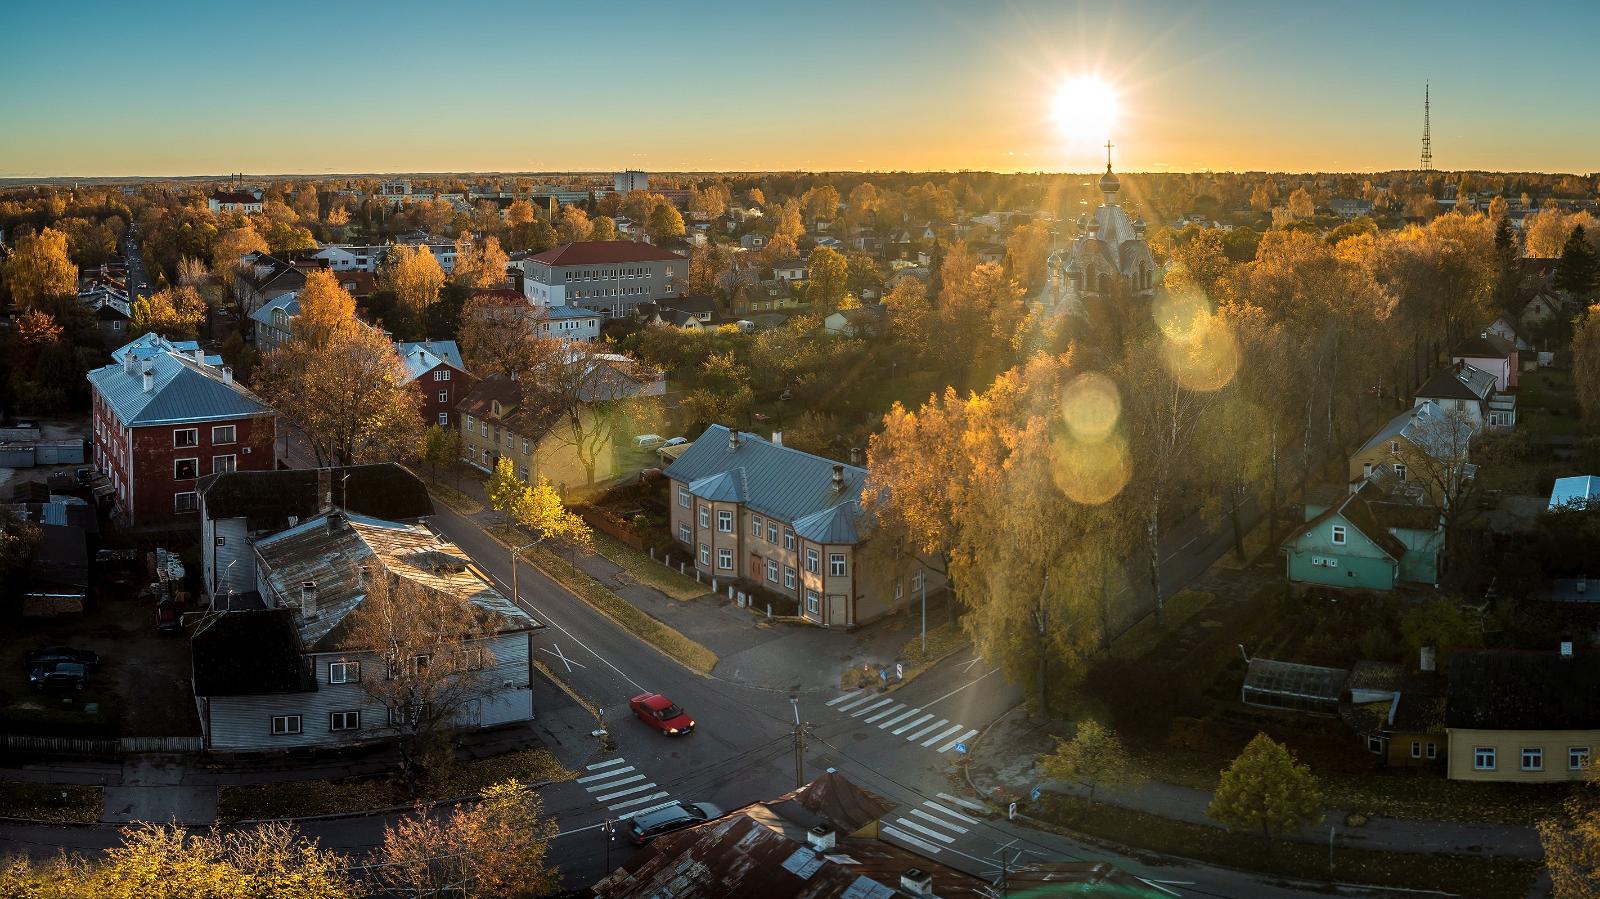 Virtual tour of the city of Tartu: wooden houses, street art, the setting sun and, the surrounding greenery